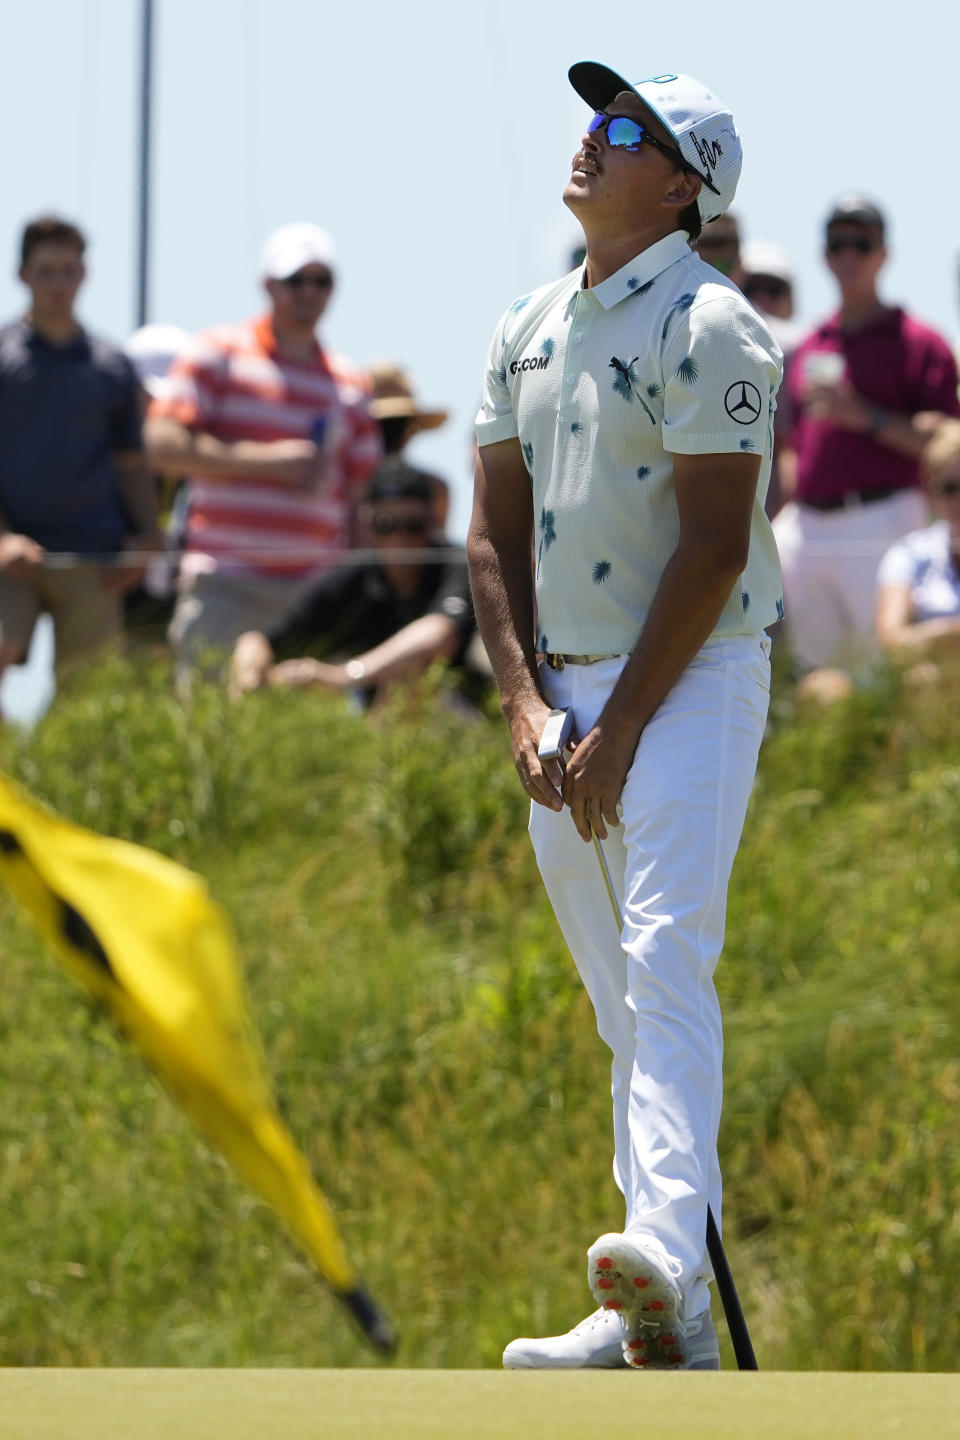 Rickie Fowler reacts as he misses a birdie putt on the eighth hole during the first round of the PGA Championship golf tournament on the Ocean Course Thursday, May 20, 2021, in Kiawah Island, S.C. (AP Photo/David J. Phillip)